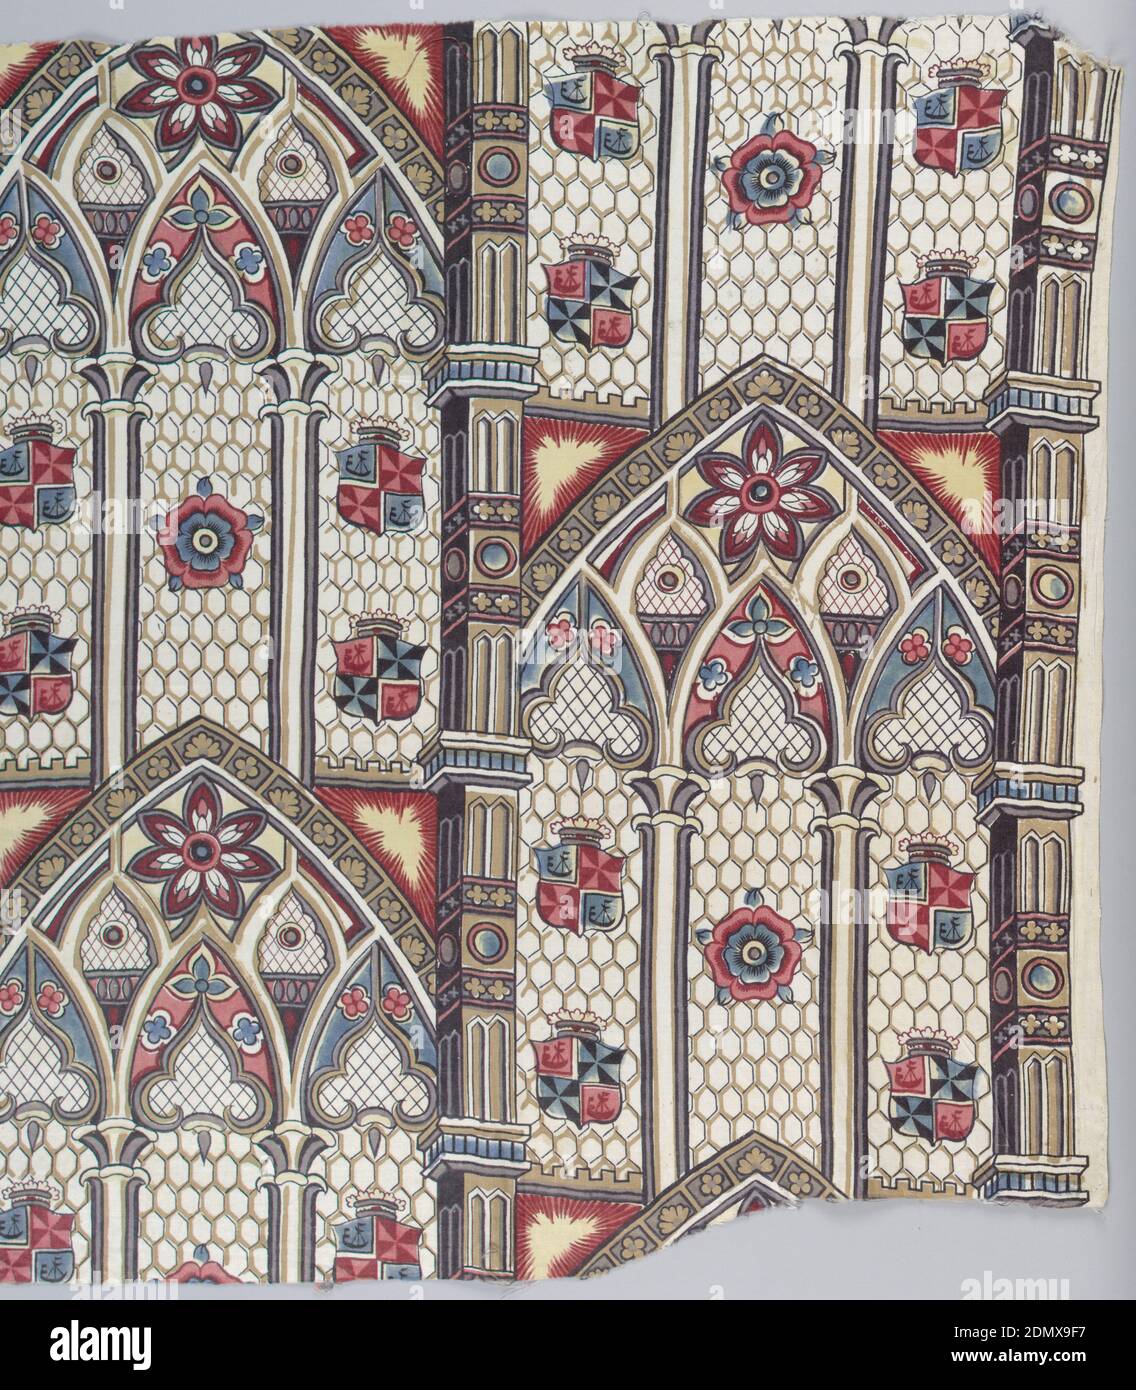 Textile, Medium: cotton Technique: block printed on plain weave, Pattern is comprised of pointed stained glass windows and arches of a church in the Gothic style. Outline of leaded glass probably roller printed while the balance is block printed. Design shows arched windows in three sections with rosettes and blazons in brown, red, blue, yellow and black., Cummersdale, England, ca. 1838, printed, dyed & painted textiles, Textile Stock Photo